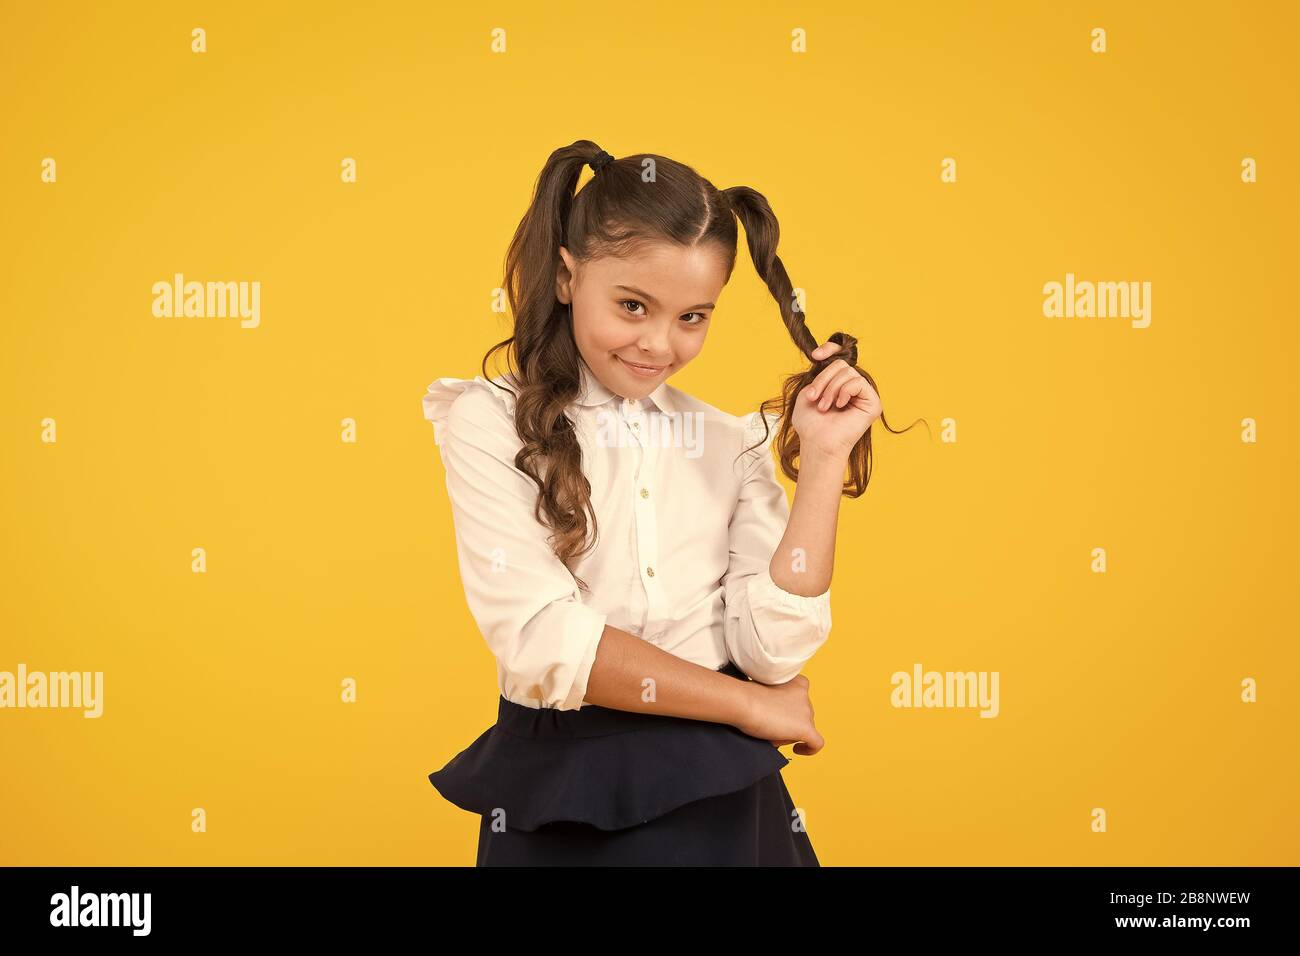 Modest hairstyle. Cute little schoolchild winding hairstyle around her finger on yellow background. Fashion girl with long ponytail hairstyle in formal style. Small kid styling hairstyle for school. Stock Photo